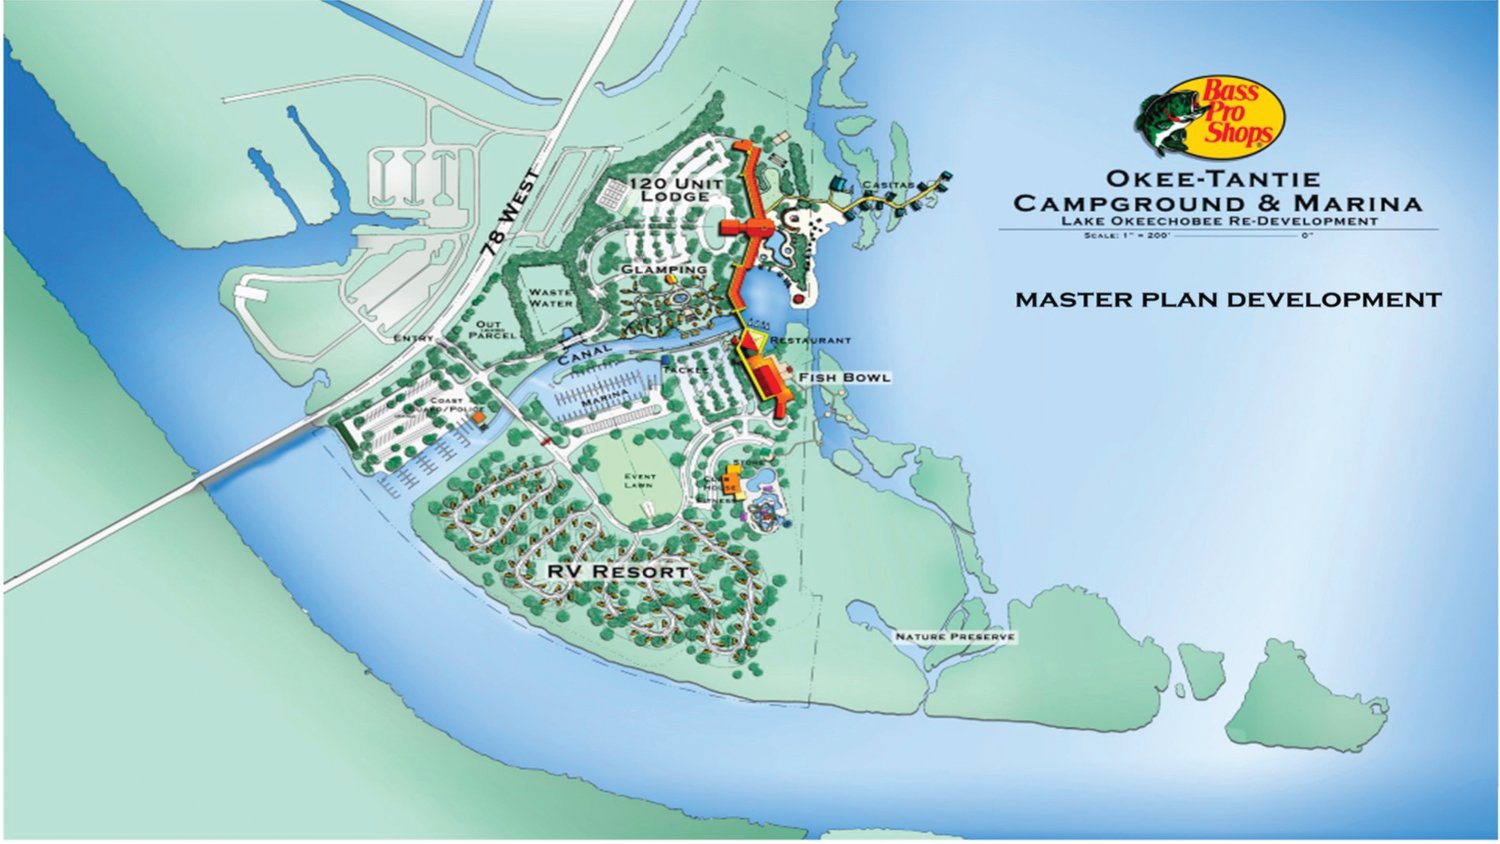 A master plan is under development for the Okee-Tantie recreation area.